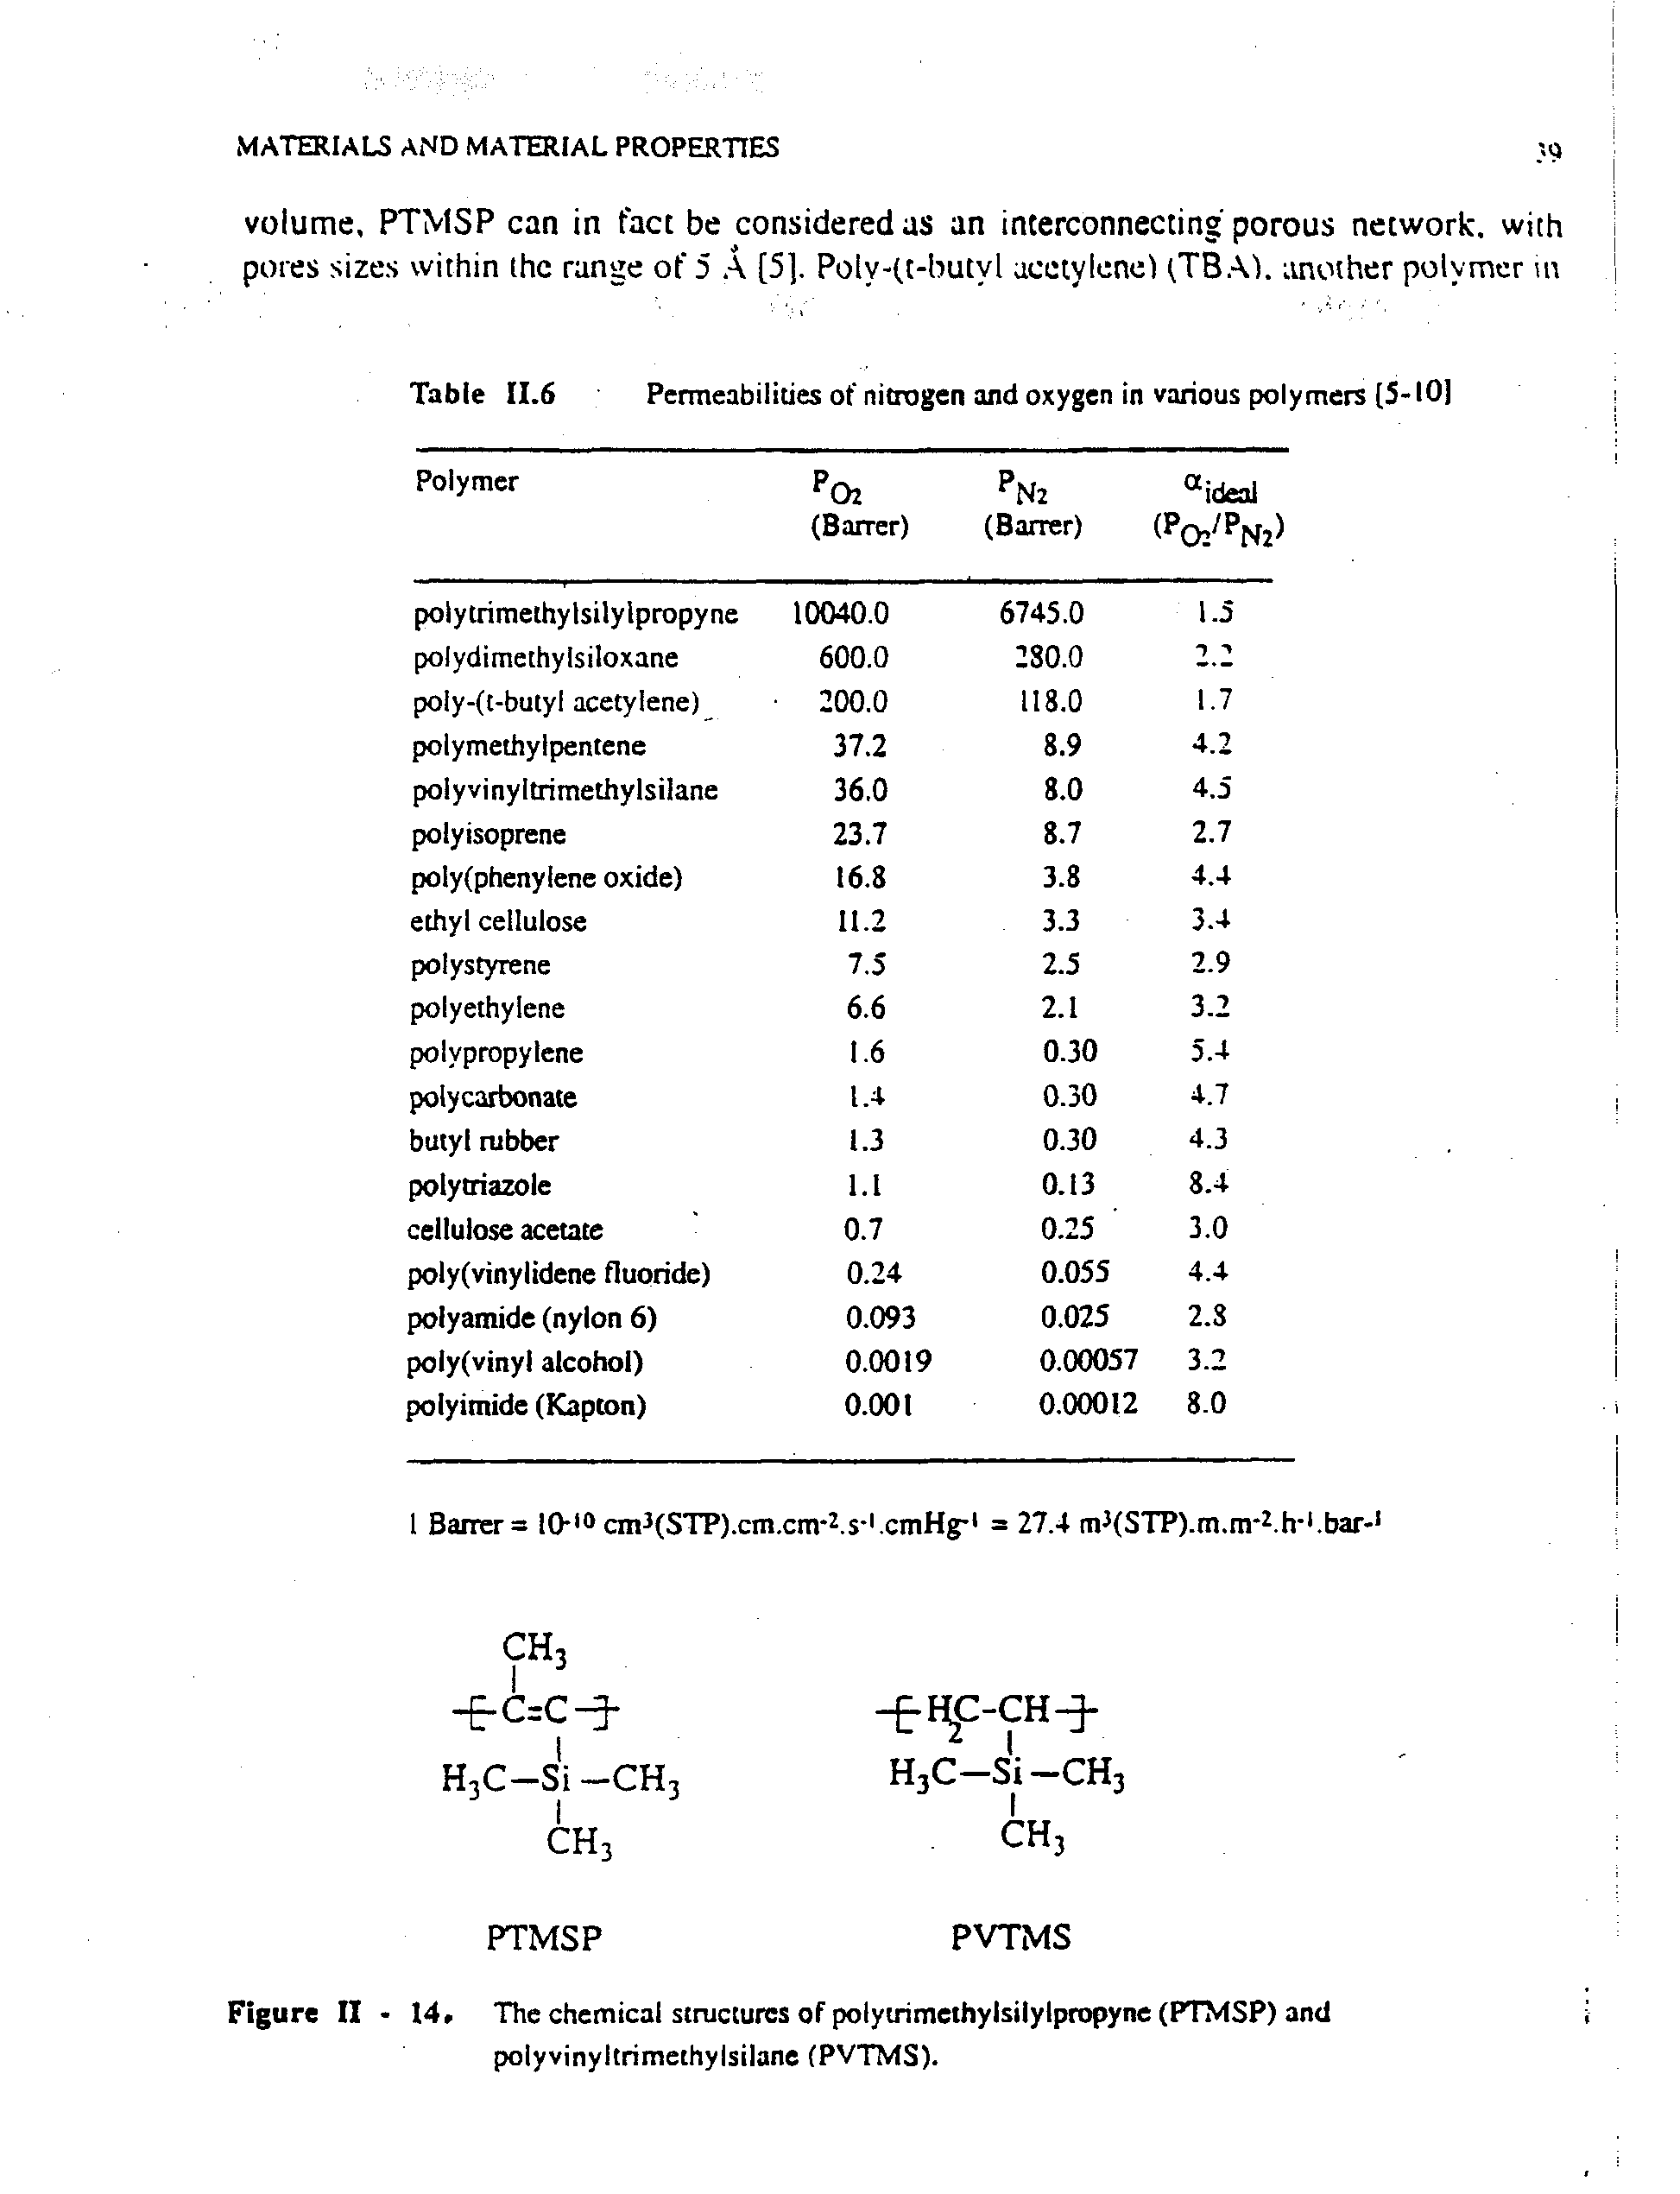 Table II.6 Permeabilities of nitrogen and oxygen in various polymers (5-10)...